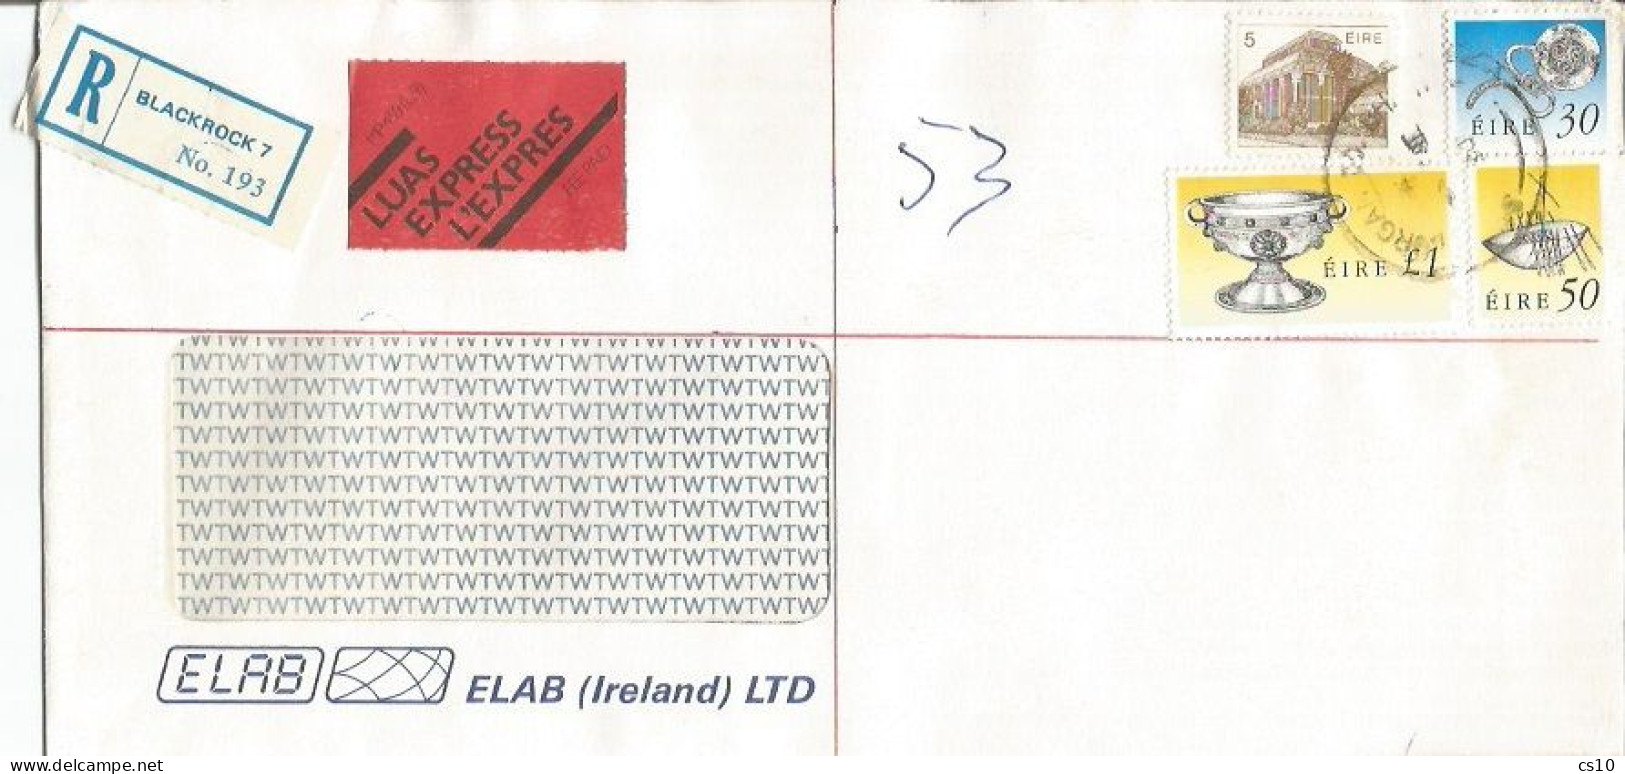 Eire Registered Express Commerce CV Blackrock 31aug1990 X Italy With 4 Stamps Rate £.1.85 - Covers & Documents